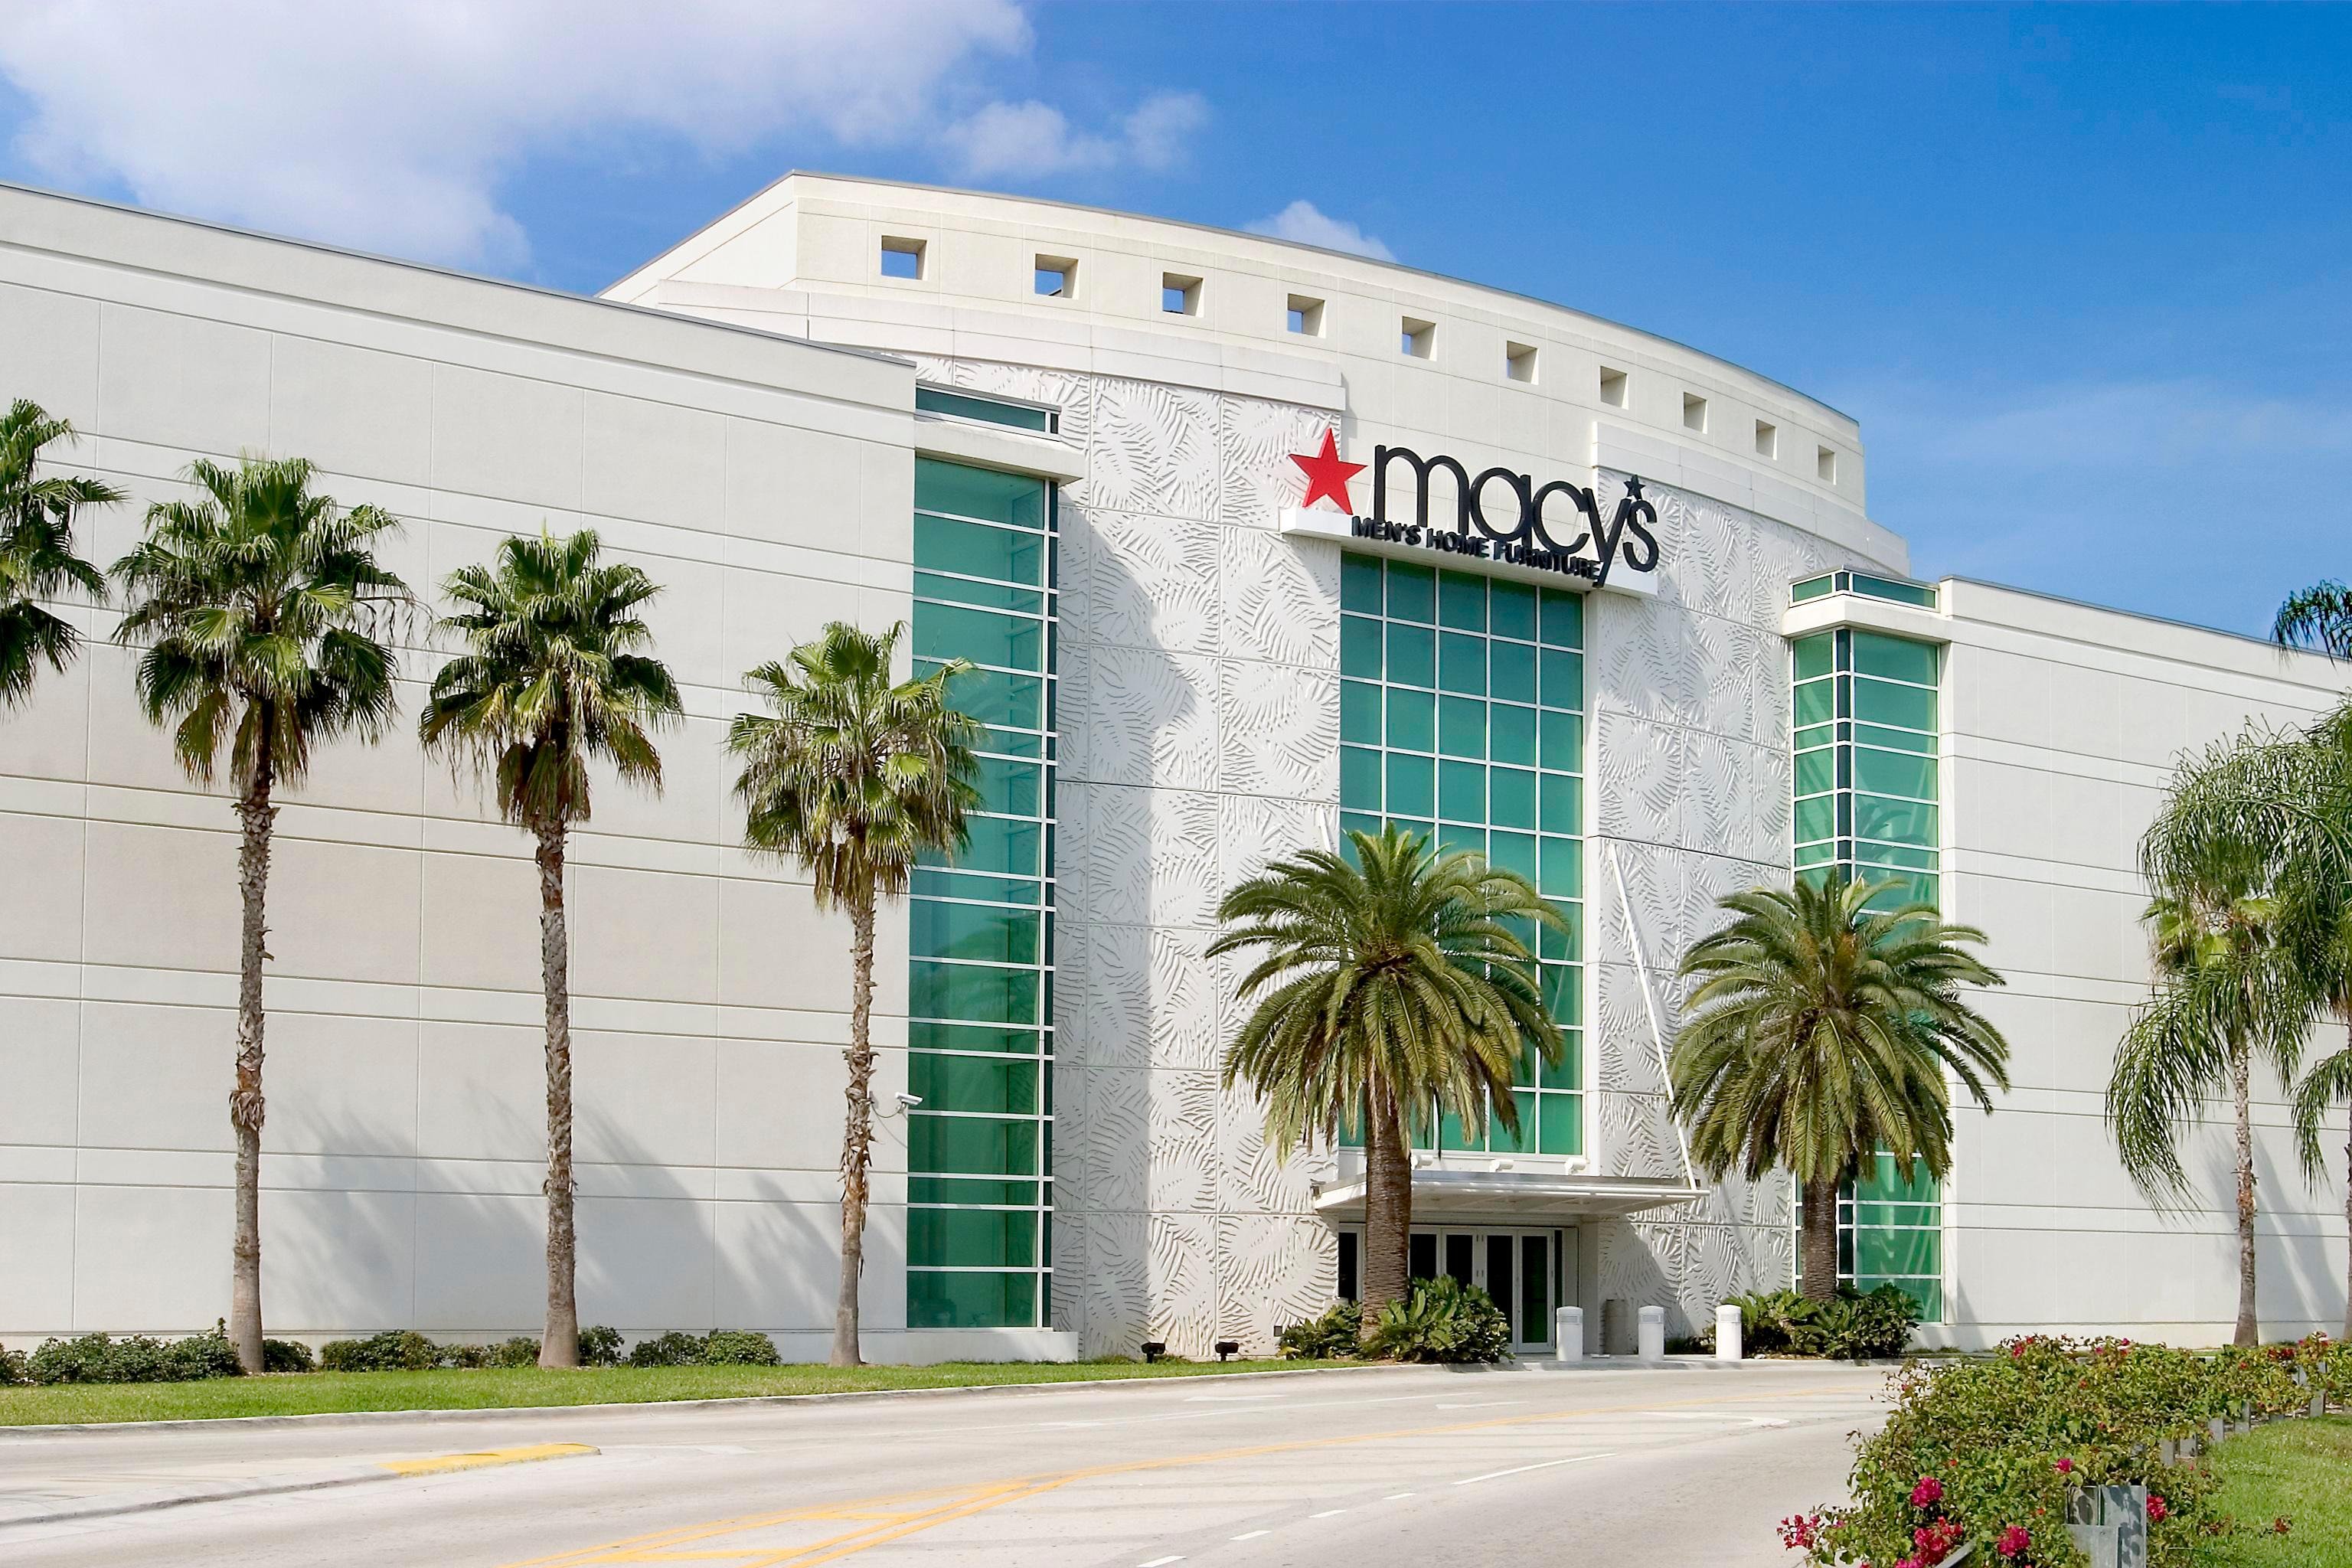 Macy's Aventura Shoes Gallery: Clothing, Shoes, Jewelry